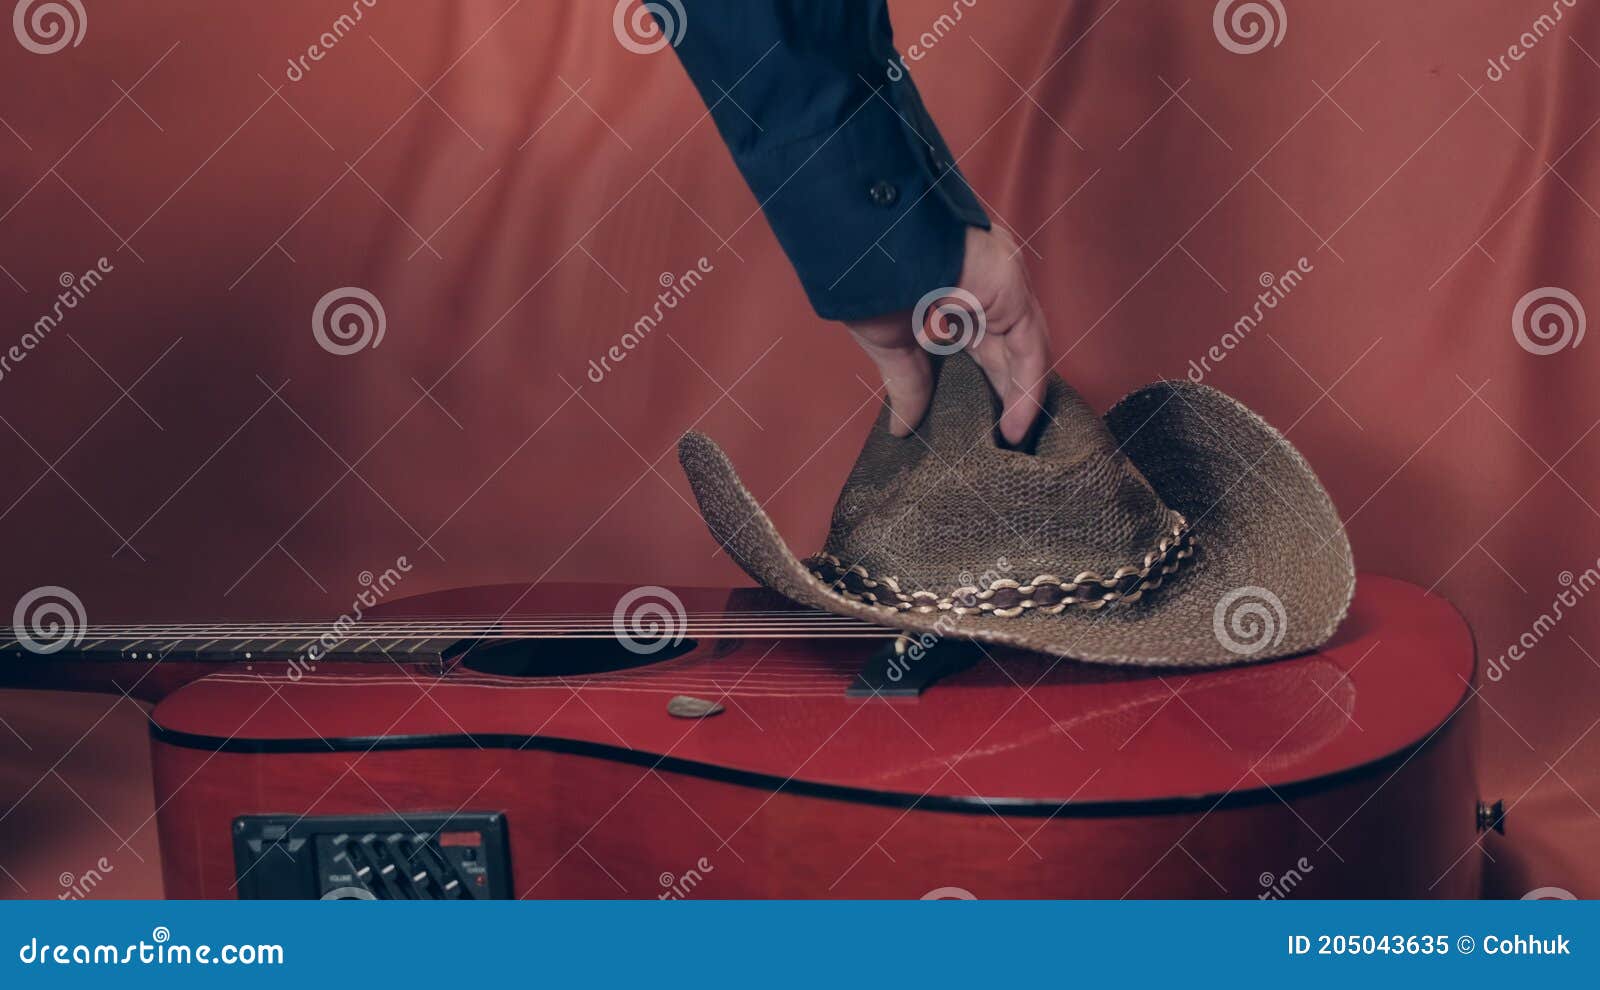 man takes a cowboy hat with red, acoustic guitar